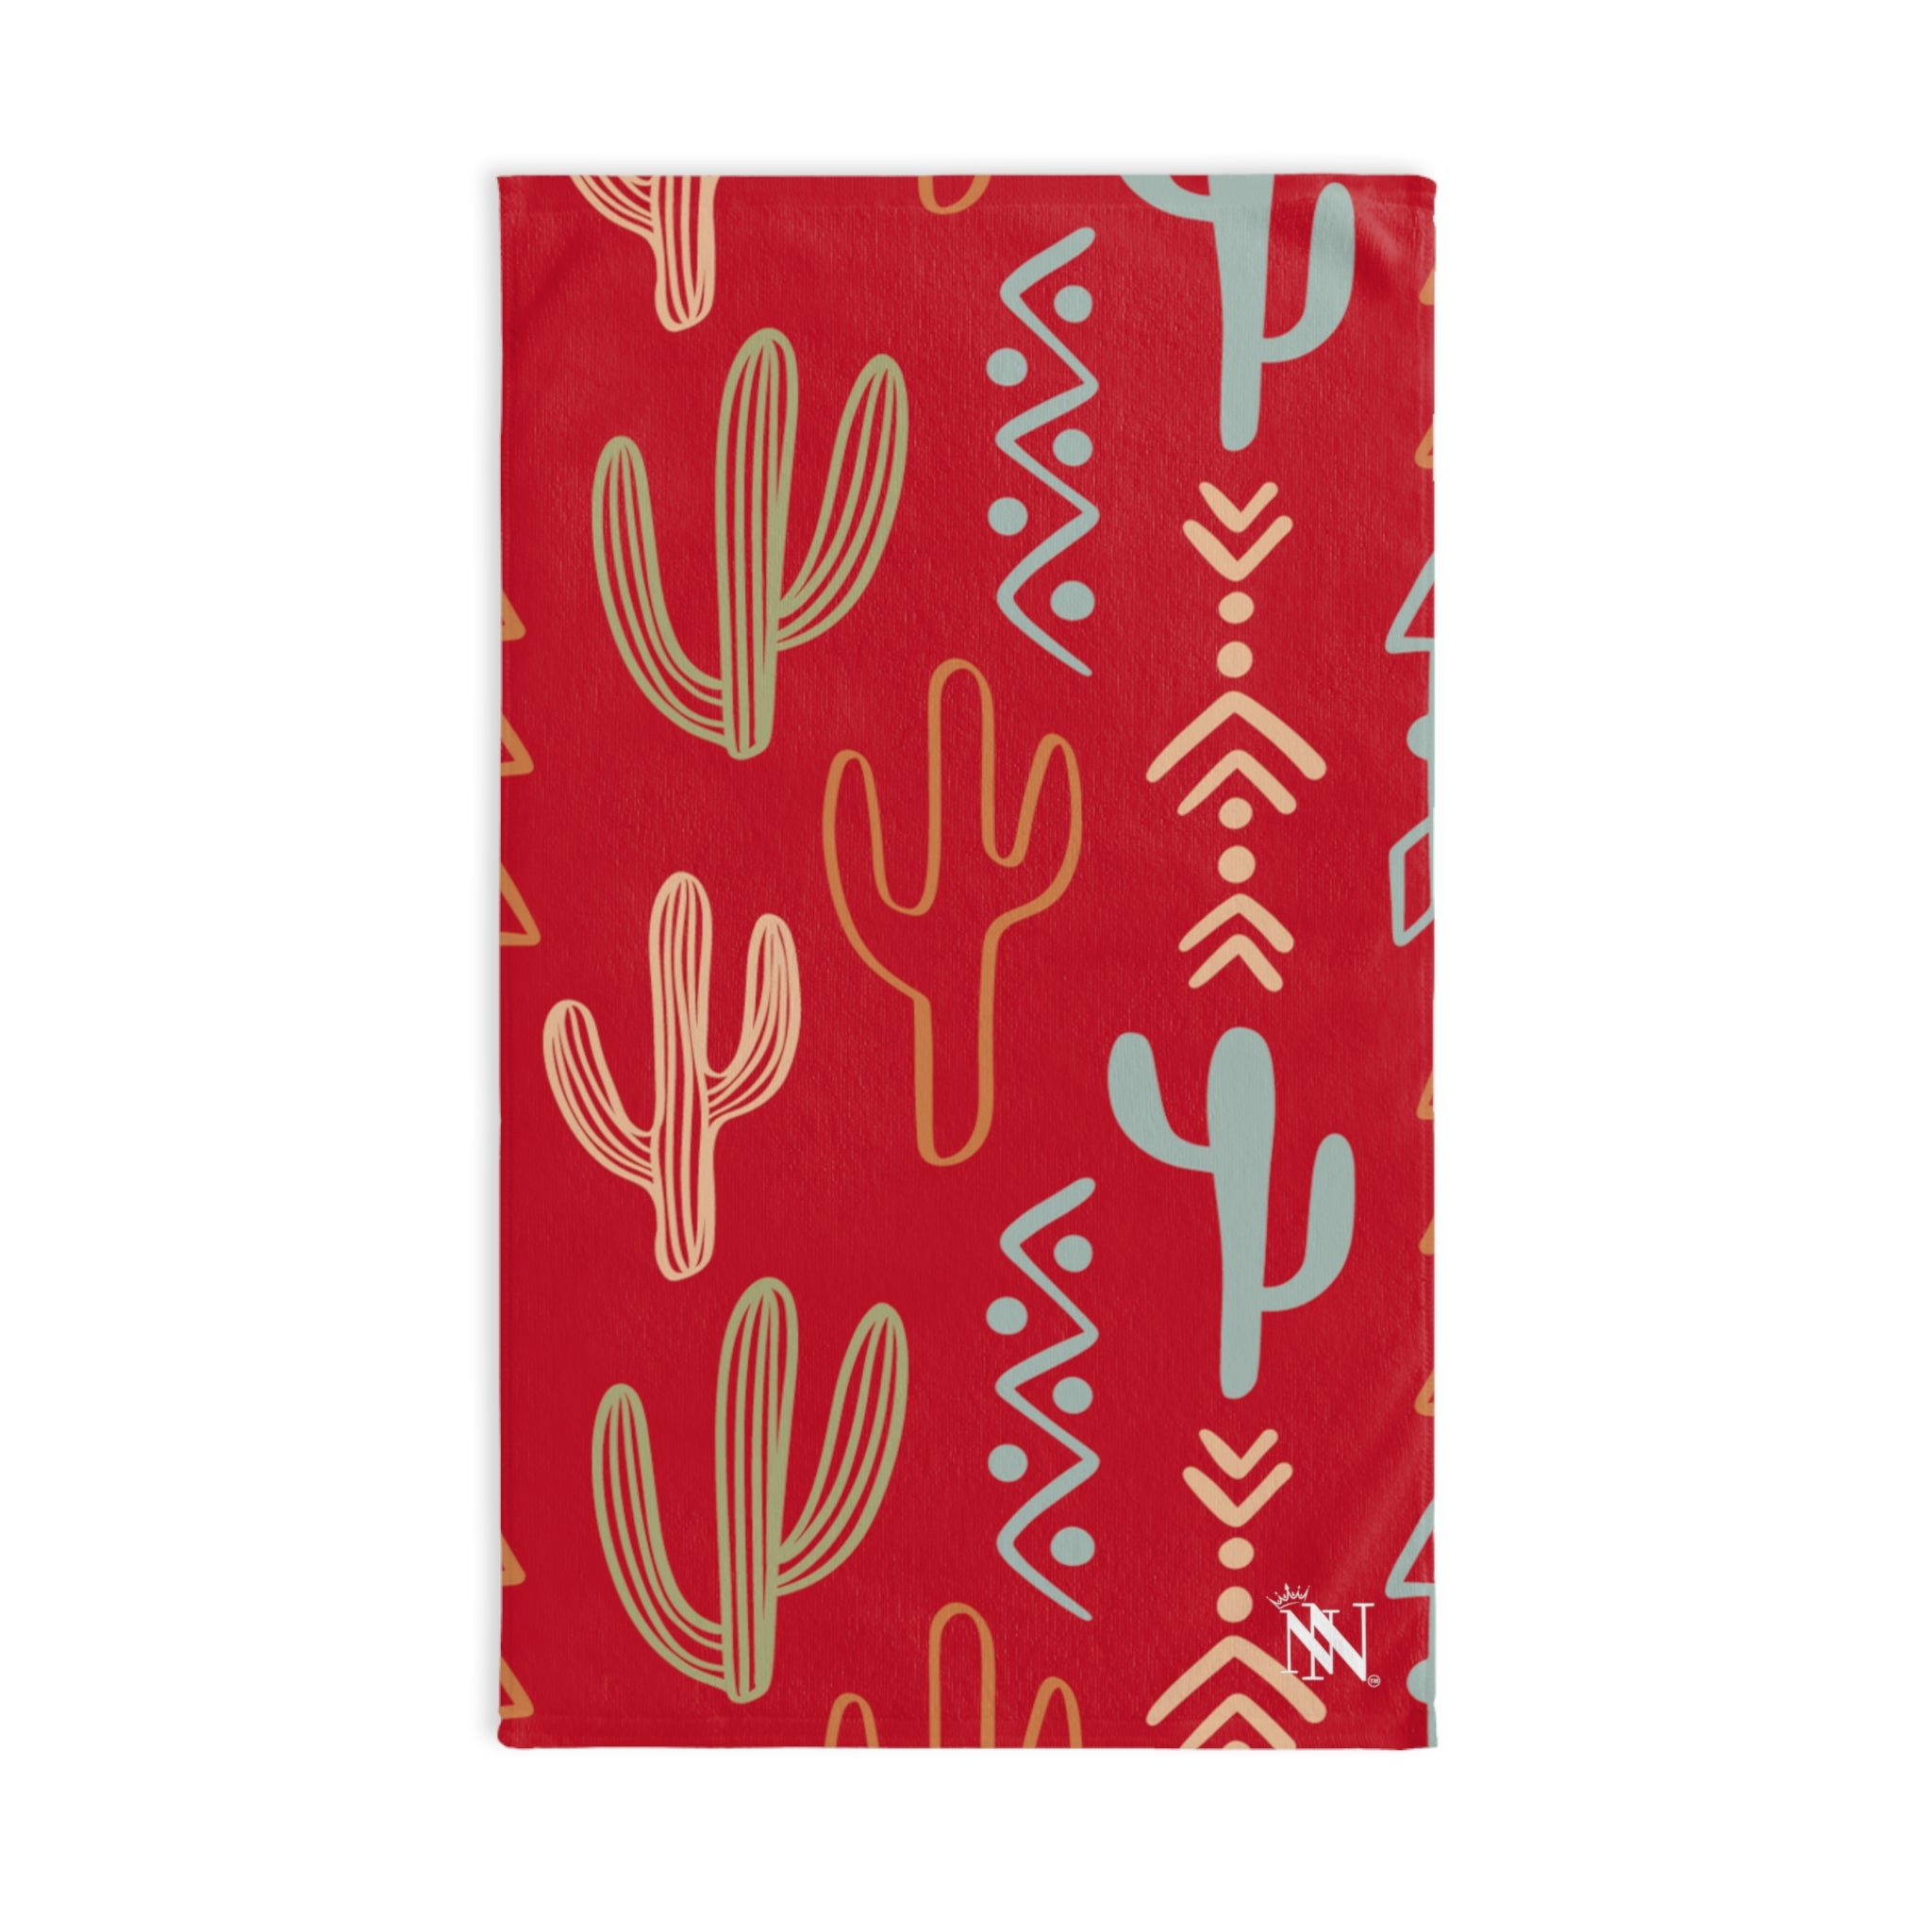 Cactus Western Red | Sexy Gifts for Boyfriend, Funny Towel Romantic Gift for Wedding Couple Fiance First Year 2nd Anniversary Valentines, Party Gag Gifts, Joke Humor Cloth for Husband Men BF NECTAR NAPKINS